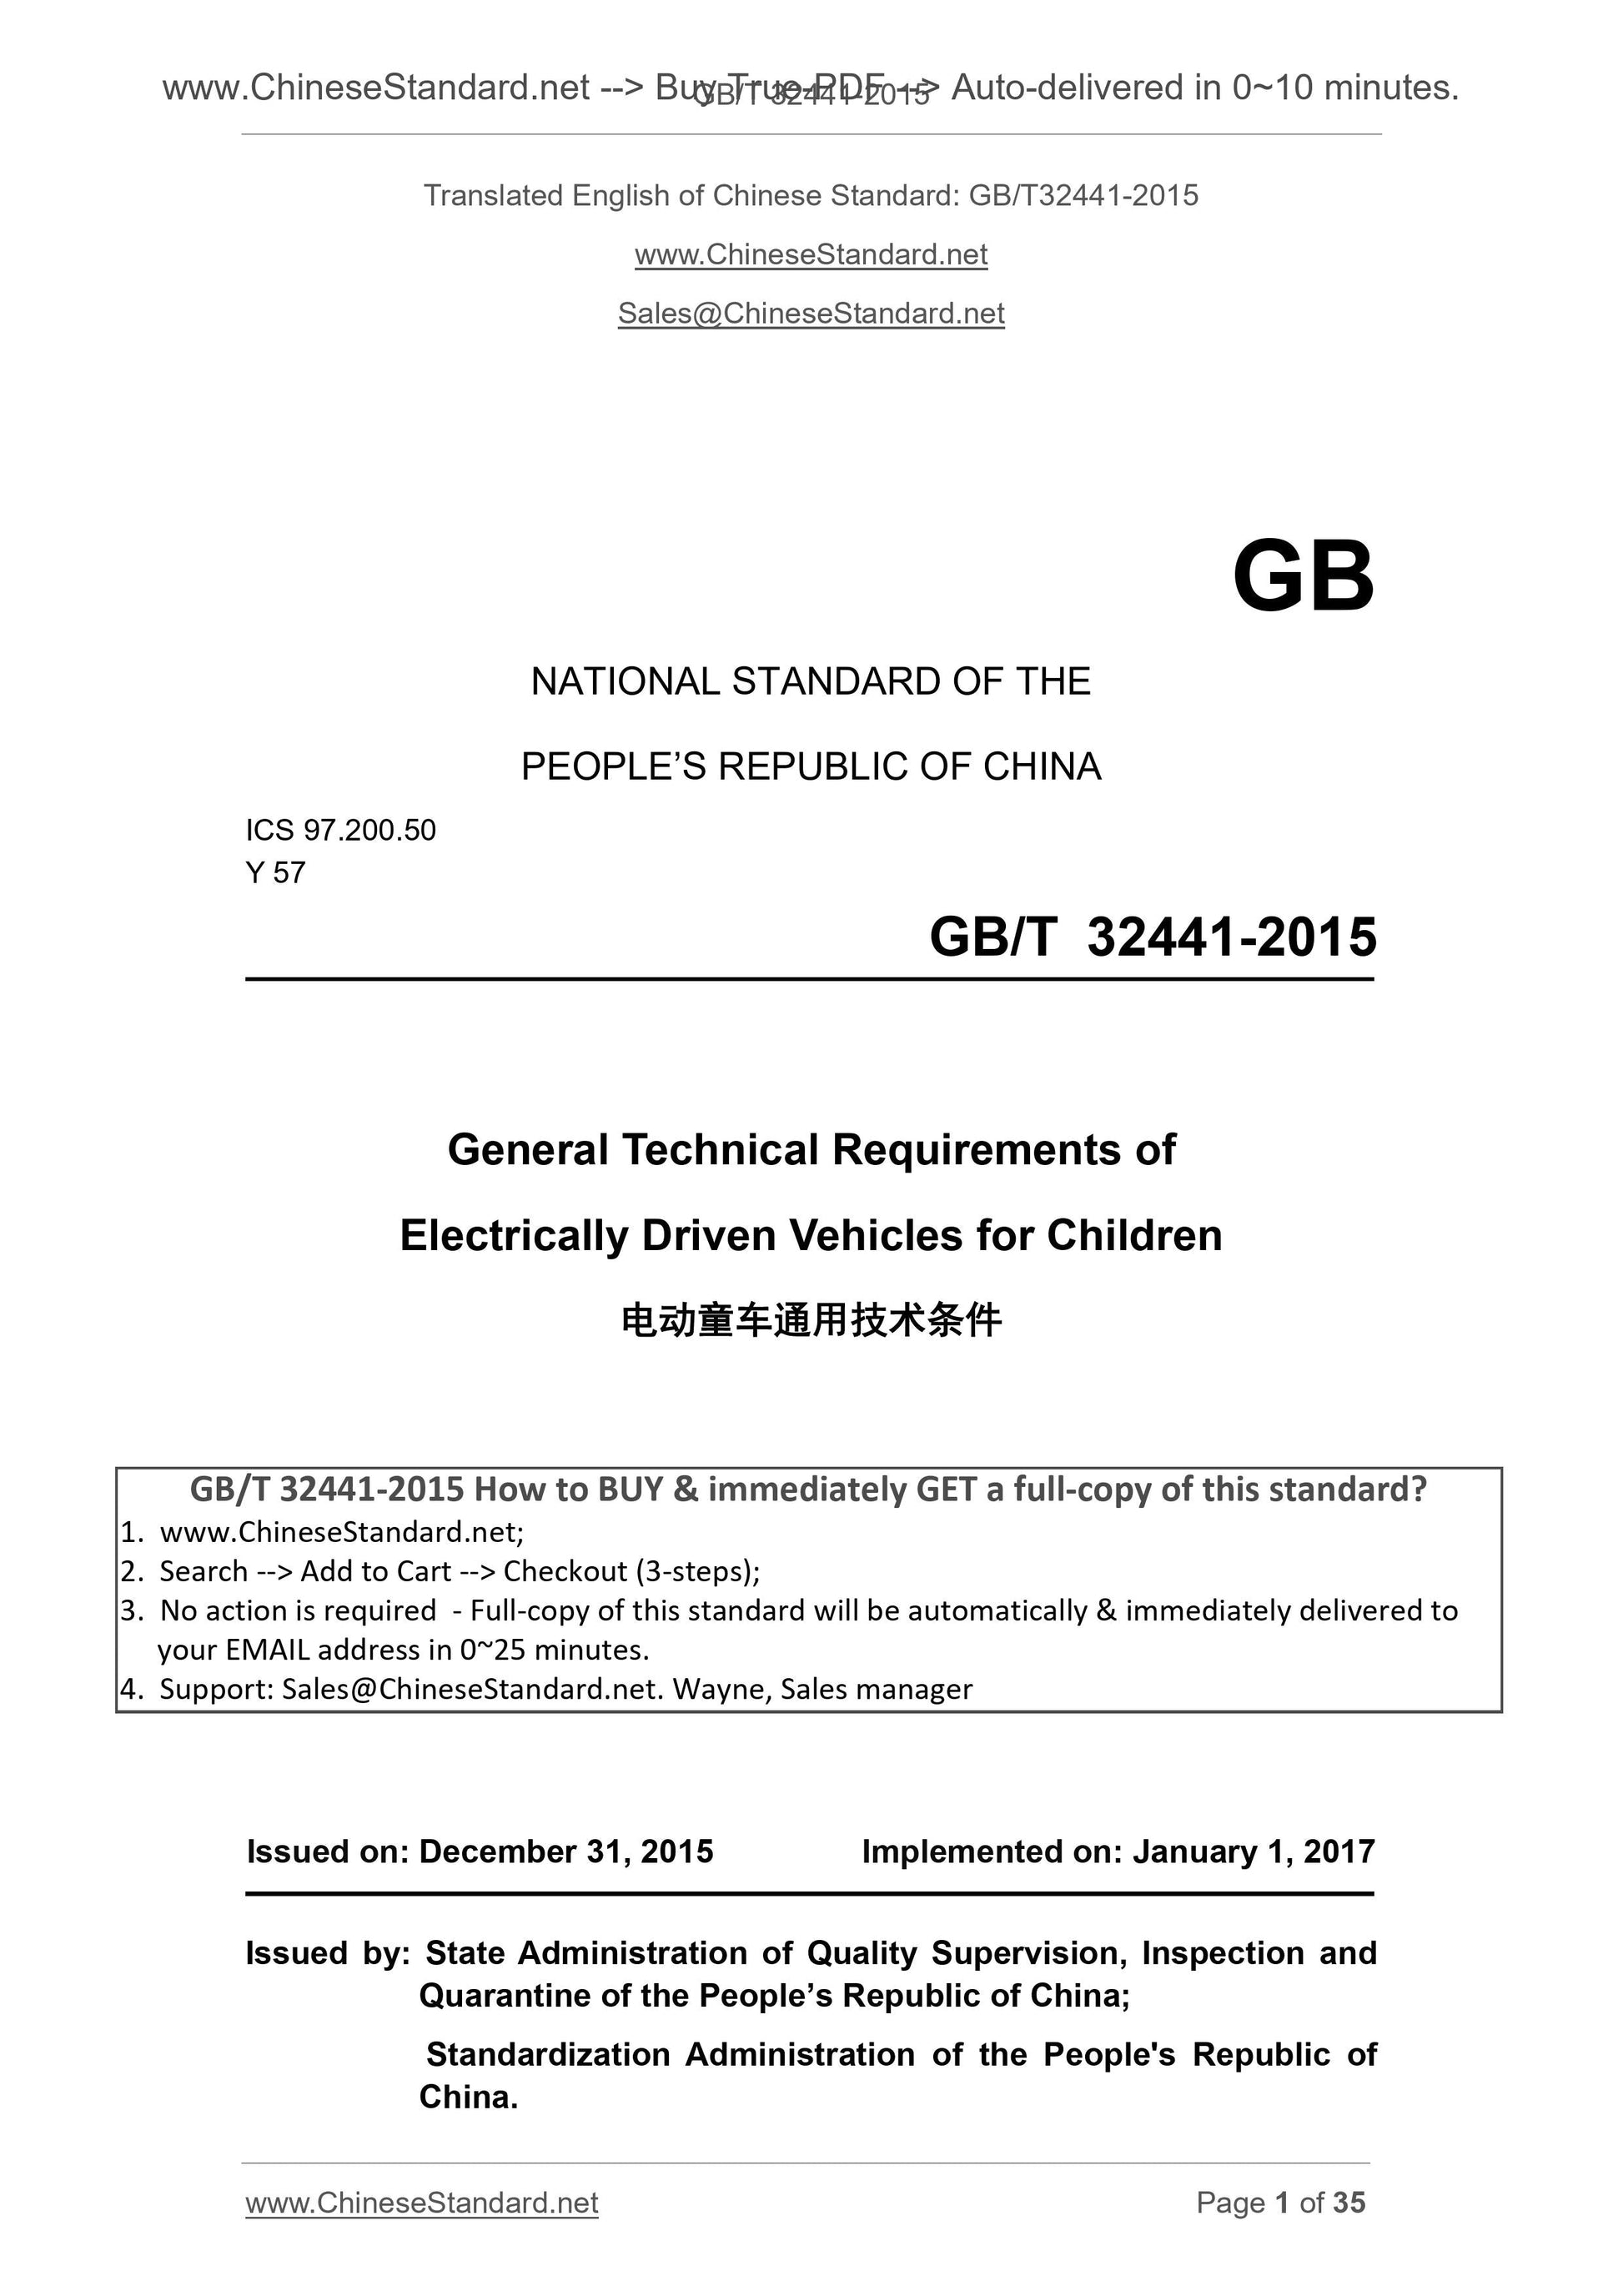 GB/T 32441-2015 Page 1